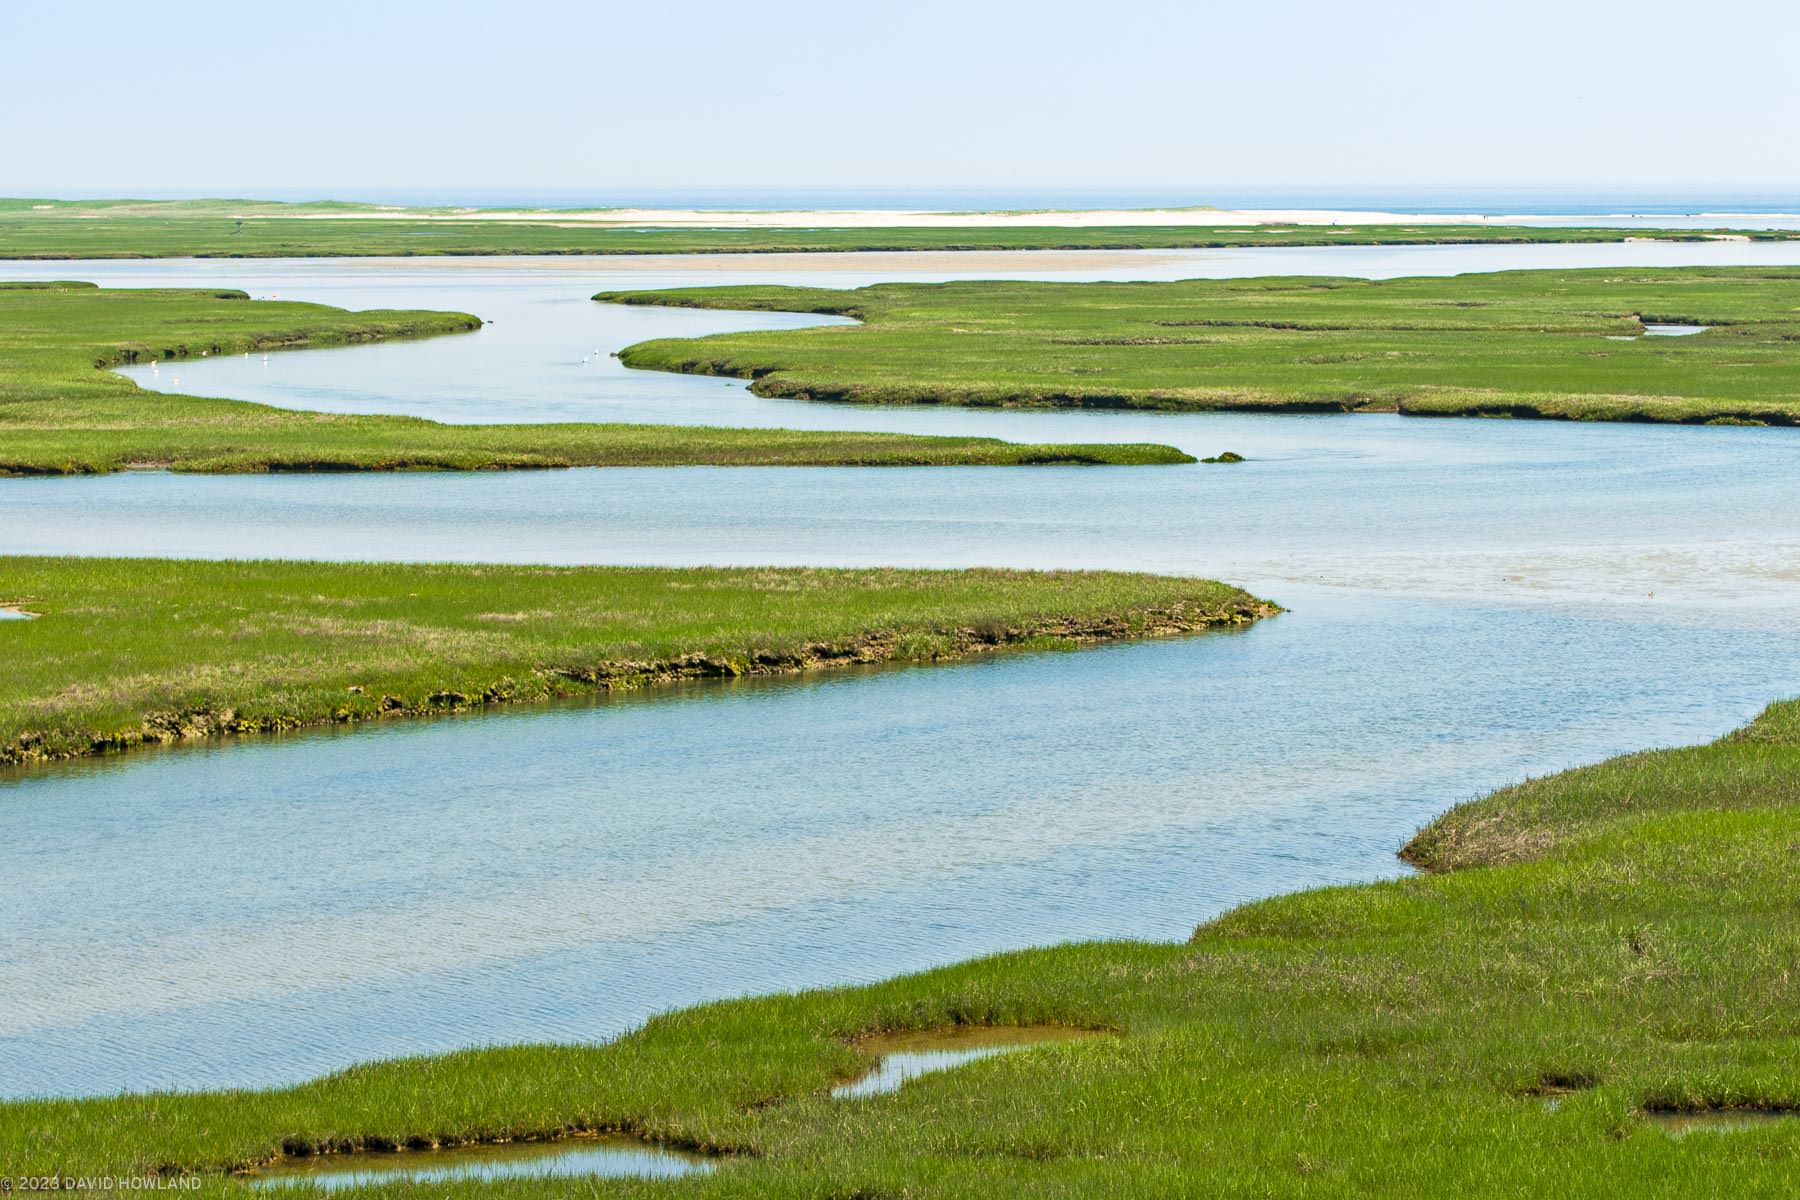 A photo of the tide waters of the ocean rising through the channels of the salt marsh at Fort Hill in the Cape Cod National Seashore